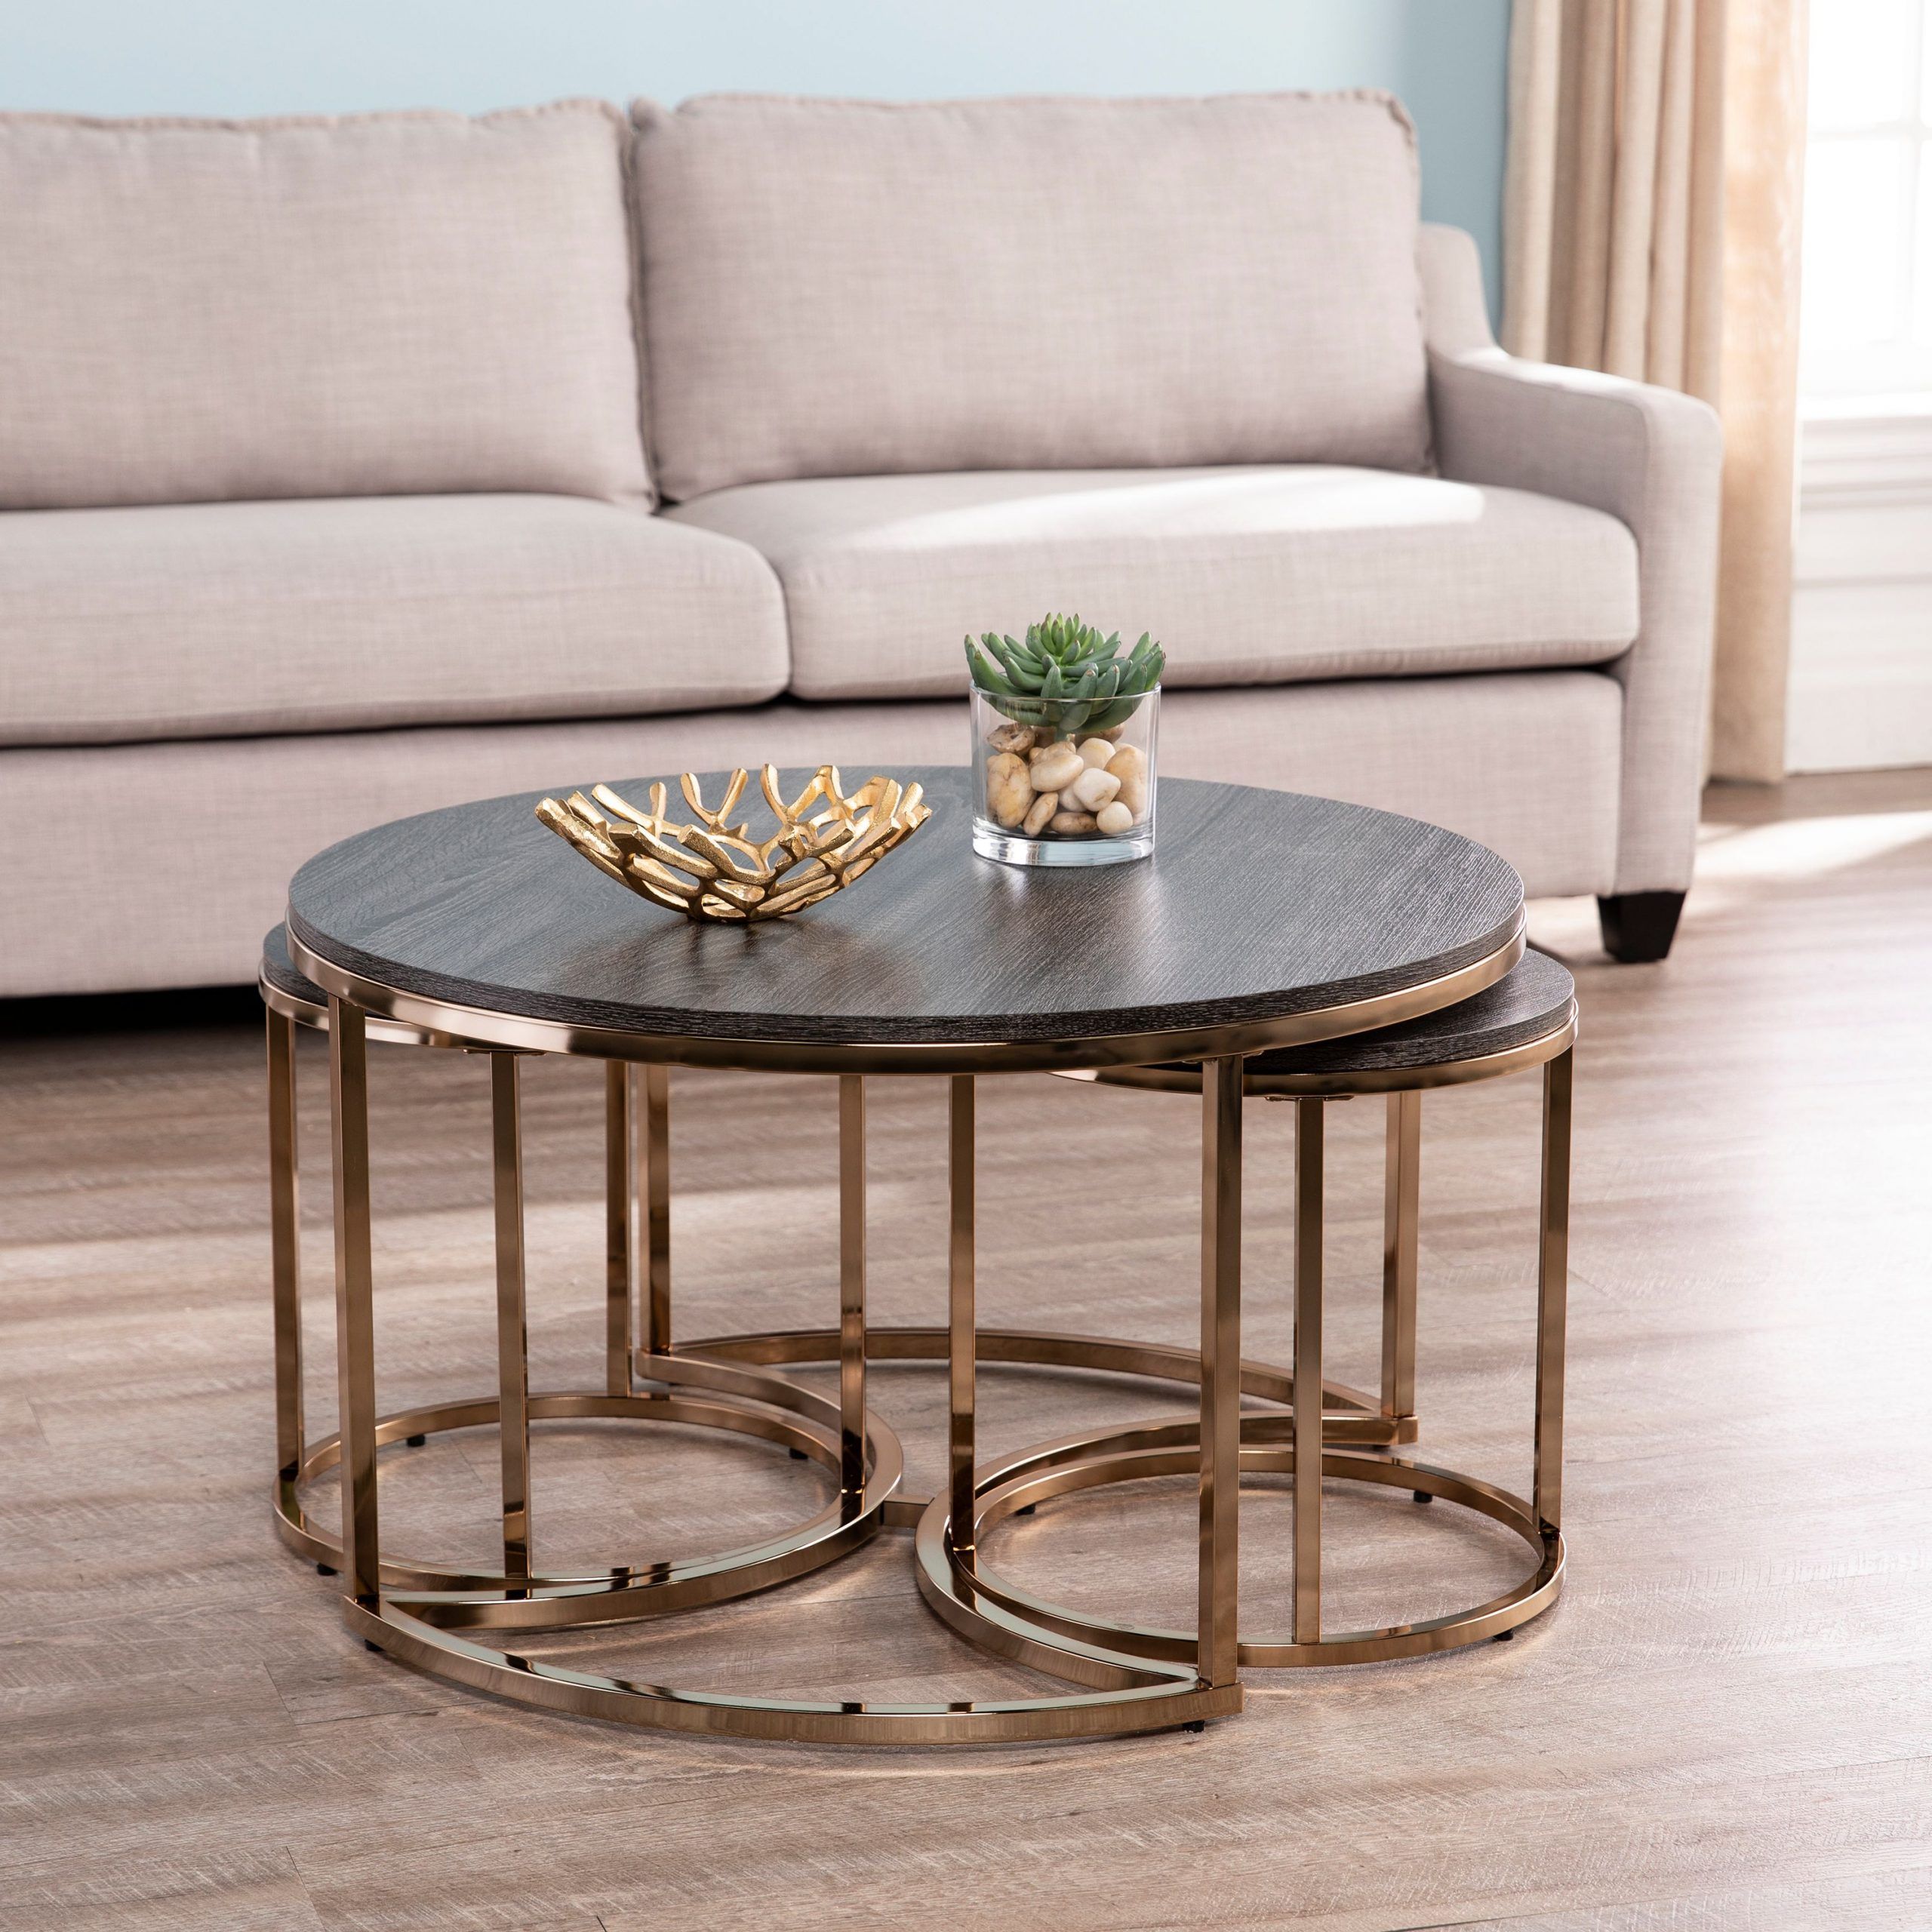 Current Lokyle Round Nesting Coffee Tables – 3pc Set, Glam Pertaining To 2 Piece Round Coffee Tables Set (View 5 of 20)